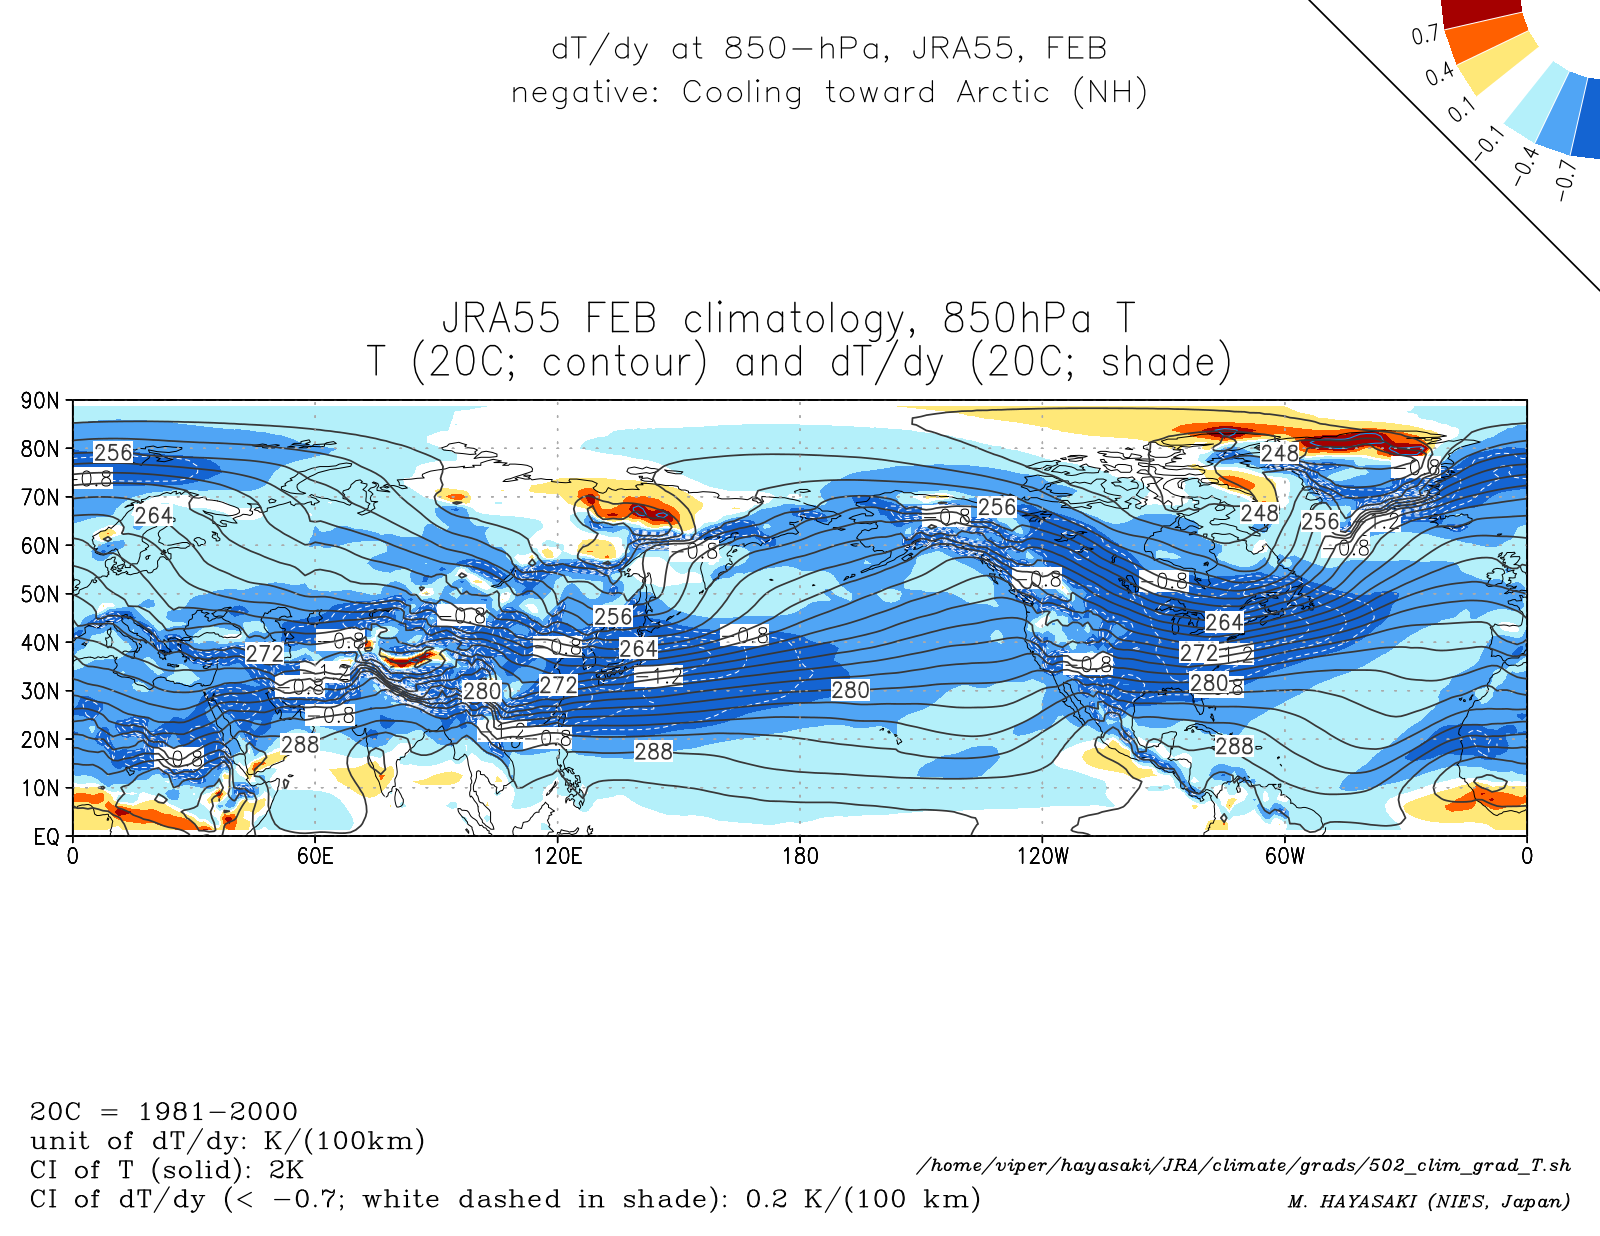 Monthly climatology (Feb) of dT/dy at 850-hPa in the NH